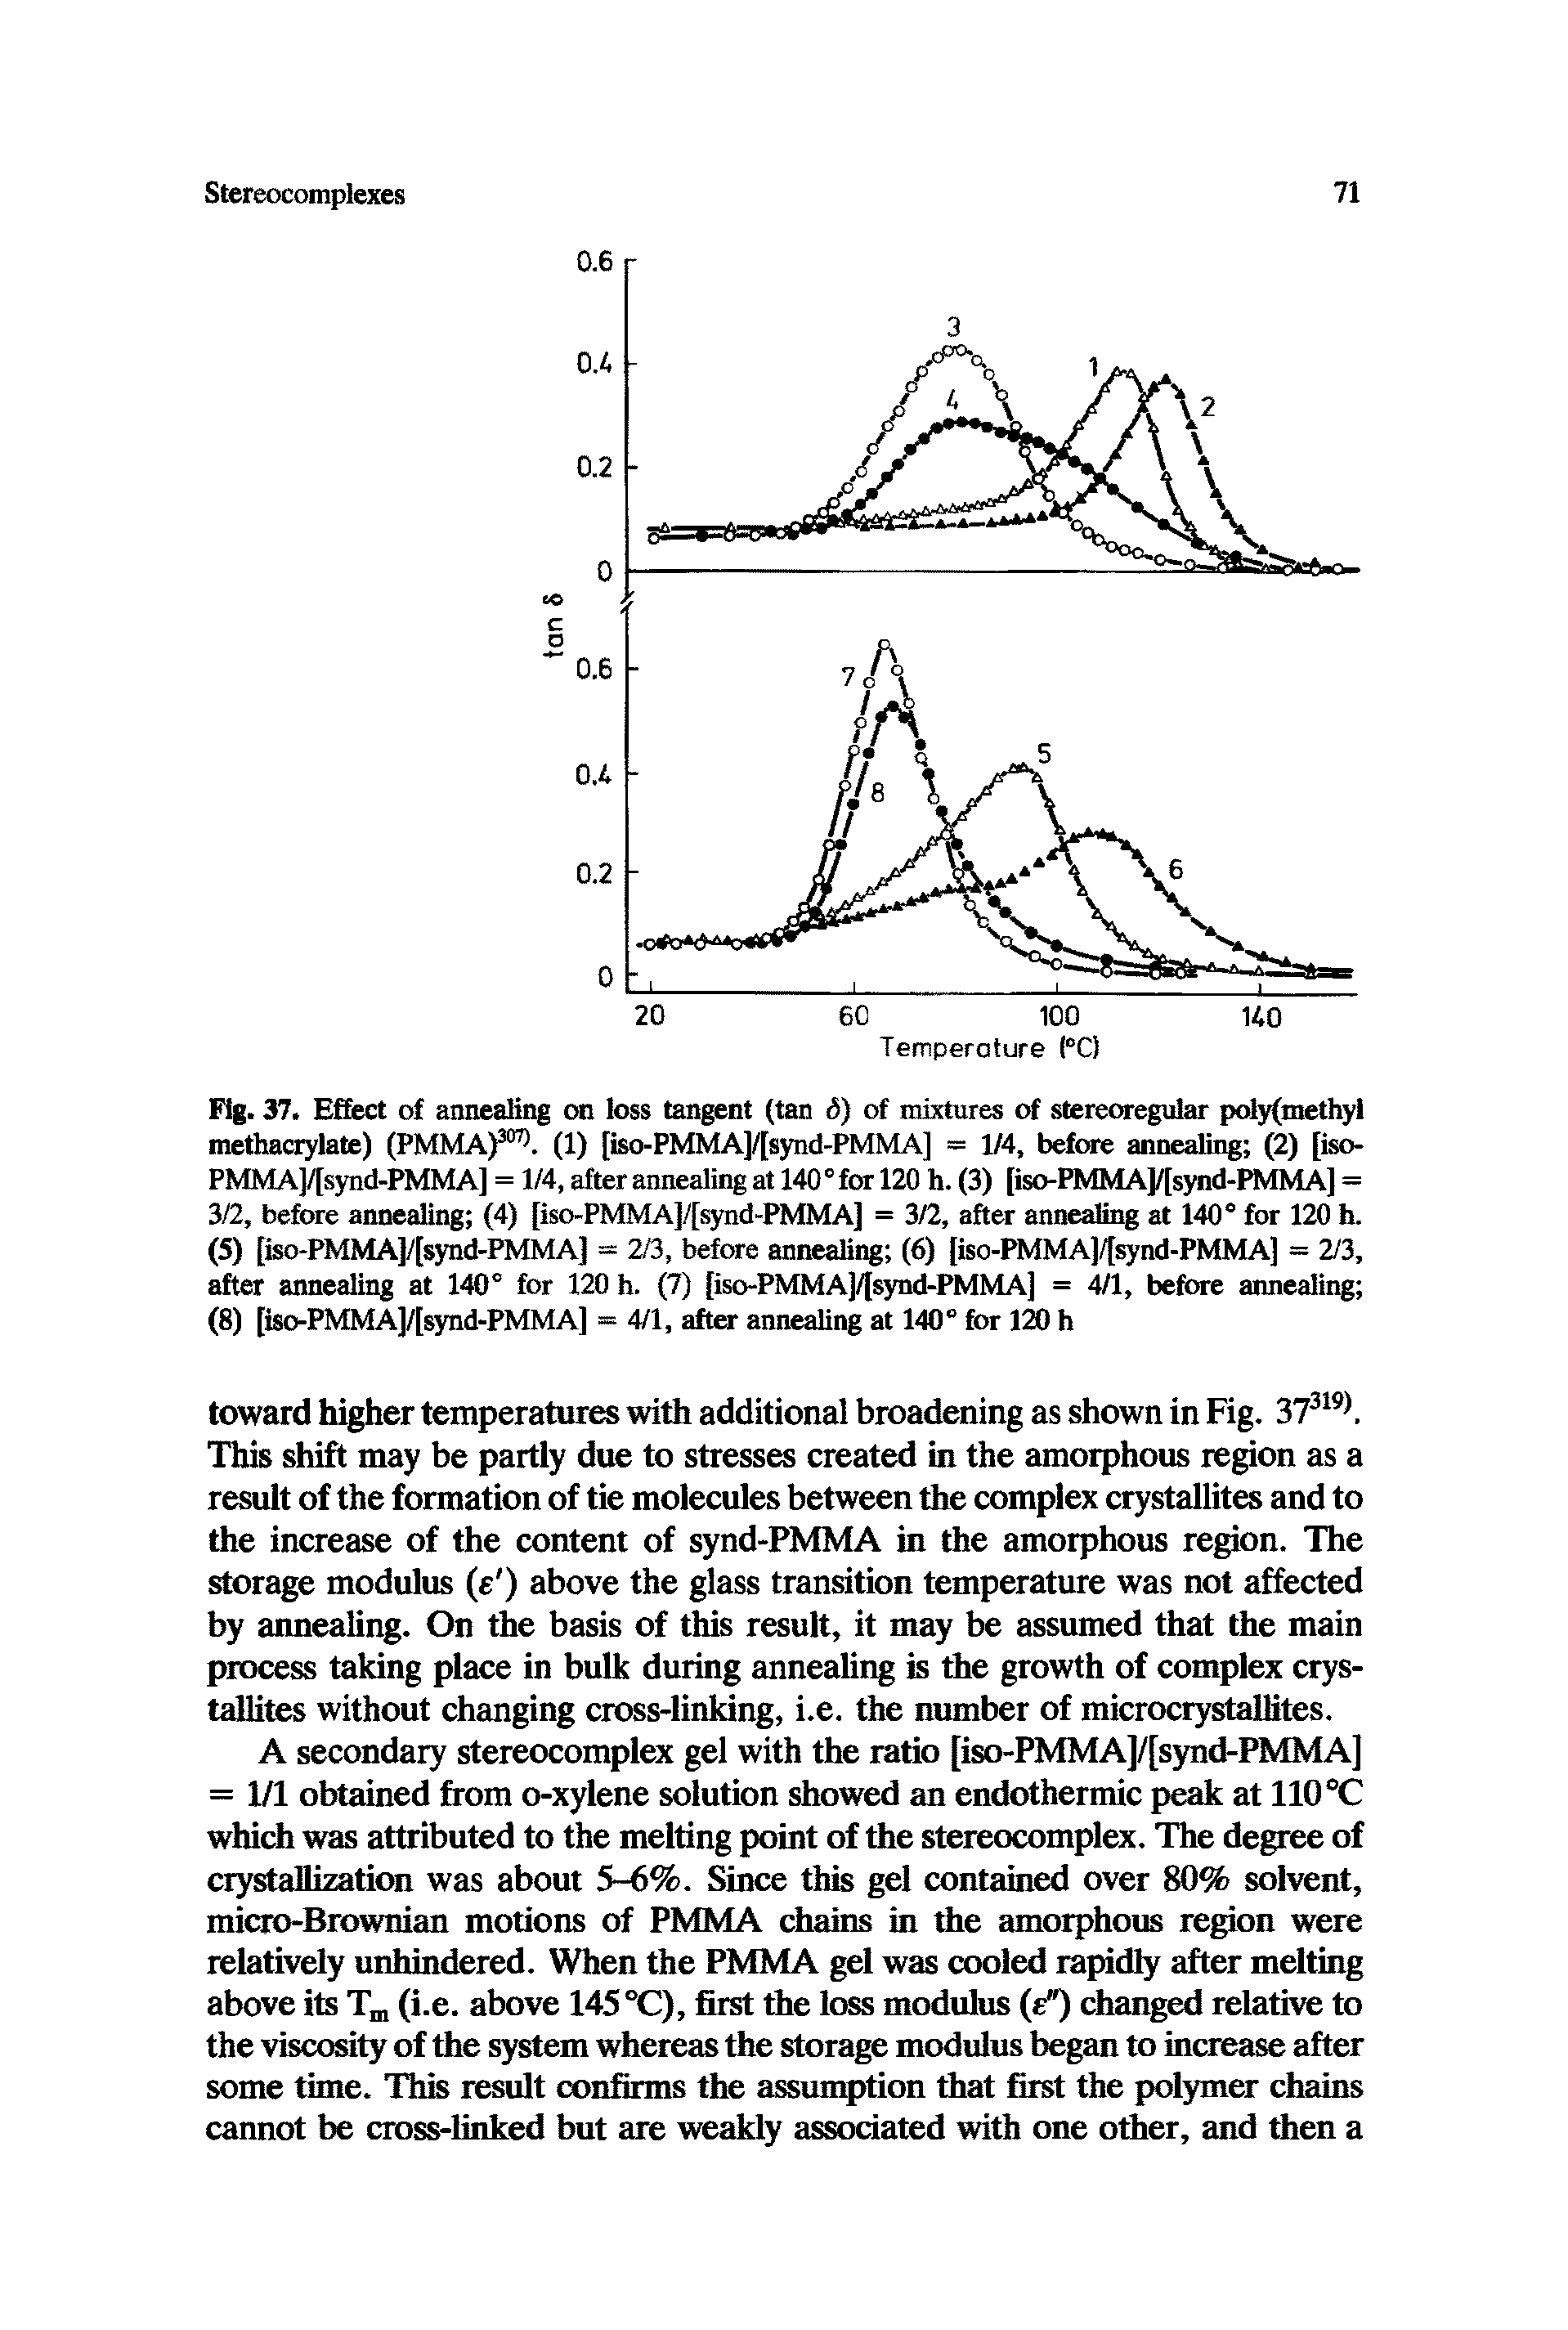 Fig. 37. Effect of annealing on loss tangent (tan 5) of mixtures of stereoregular poly(inethyl methacrylate) (EMMA)3075. (1) [iso-PMMA]/[synd-PMMA] = 1/4, before annealing (2) [iso-PMMA]/[synd-PMMA] = 1/4, after annealing at 140° for 120 h. (3) [iso-PMMA]/[synd-PMMA] = 3/2, before annealing (4) [iso-PMMA]/[synd-PMMA] = 3/2, after annealing at 140° for 120 h. (5) [iso-PMMA]/[synd-PMMA] = 2/3, before annealing (6) [iso-PMMA]/[synd-PMMA] = 2/3, after annealing at 140° for 120 h. (7) [iso-PMMA]/[synd-PMMA] = 4/1, before annealing (8) [iso-PMMA]/[synd-PMMA] = 4/1, after annealing at 140° for 120 h...